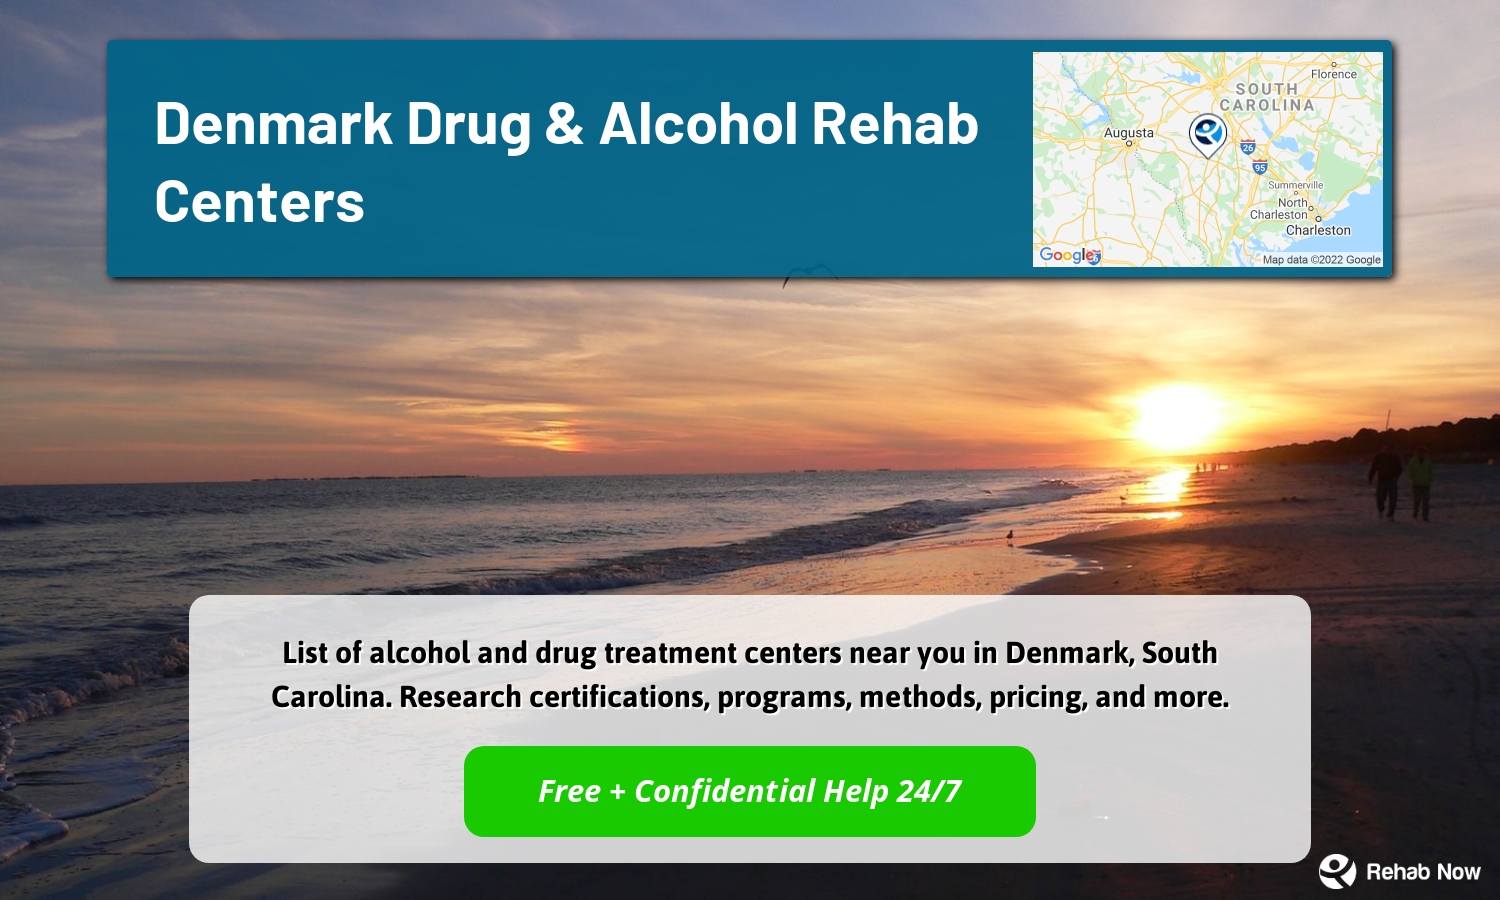 List of alcohol and drug treatment centers near you in Denmark, South Carolina. Research certifications, programs, methods, pricing, and more.